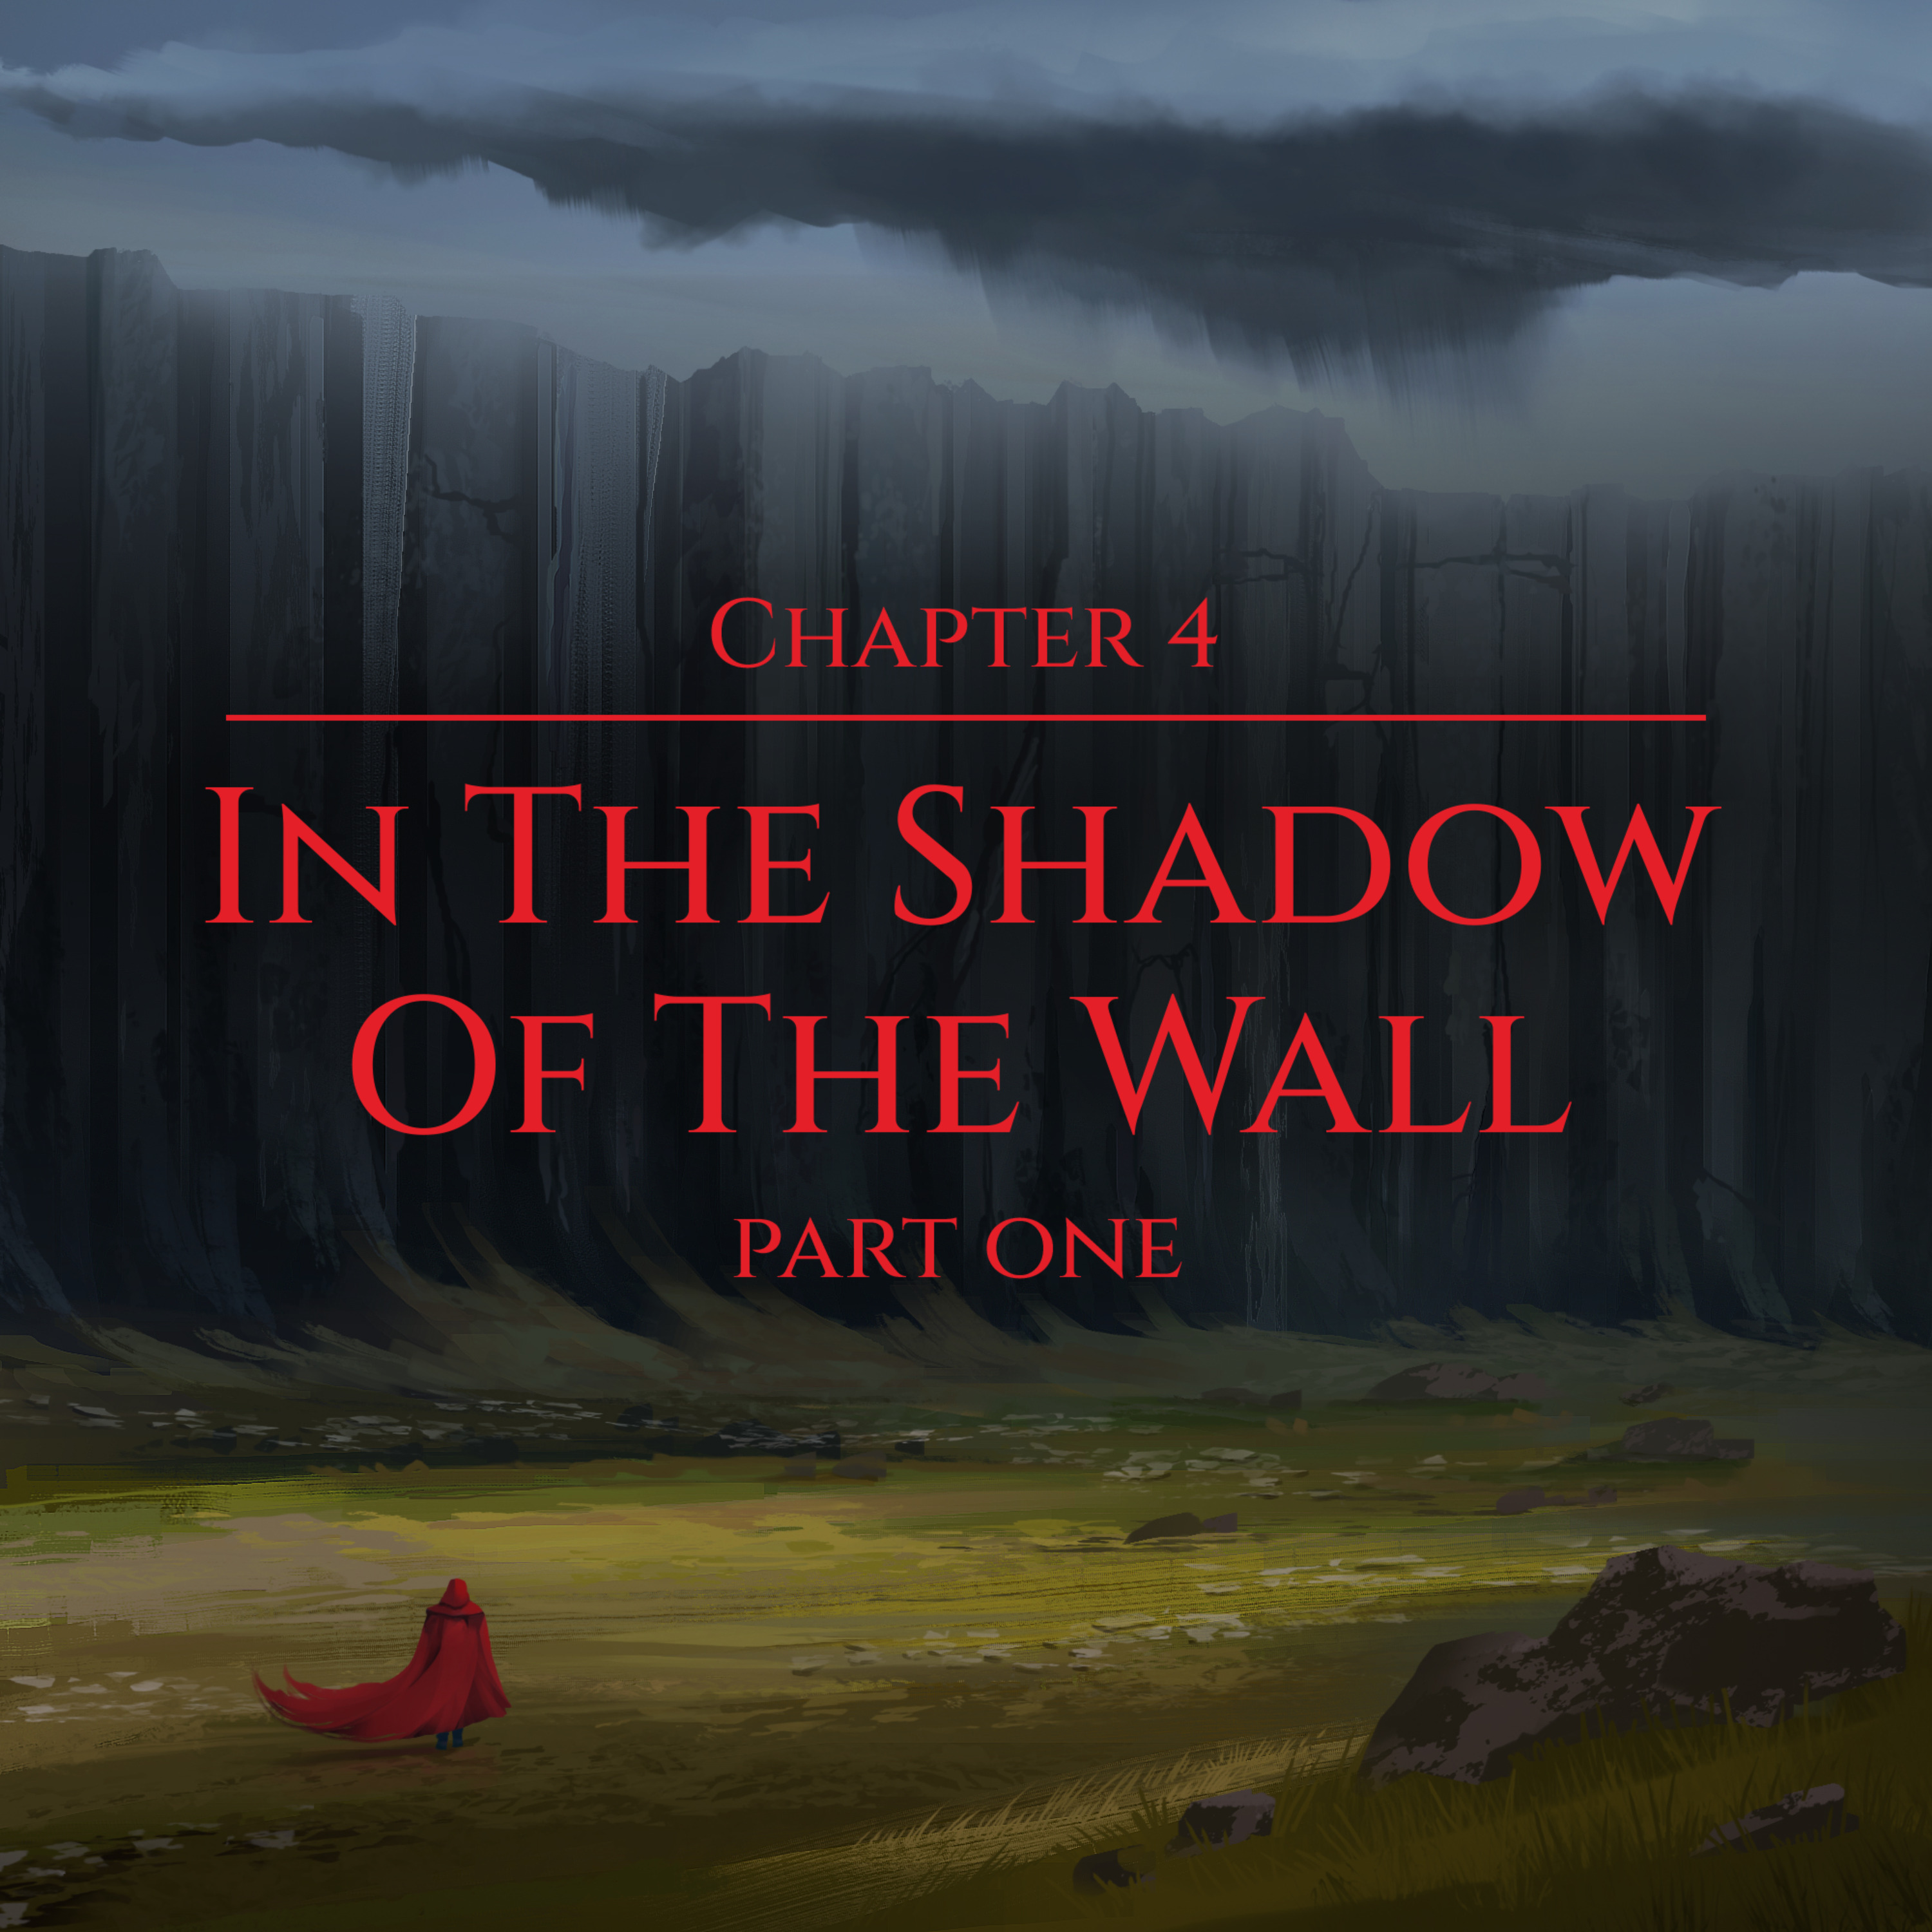 Book 1 | Chapter 4 | In the Shadow of the Wall pt I